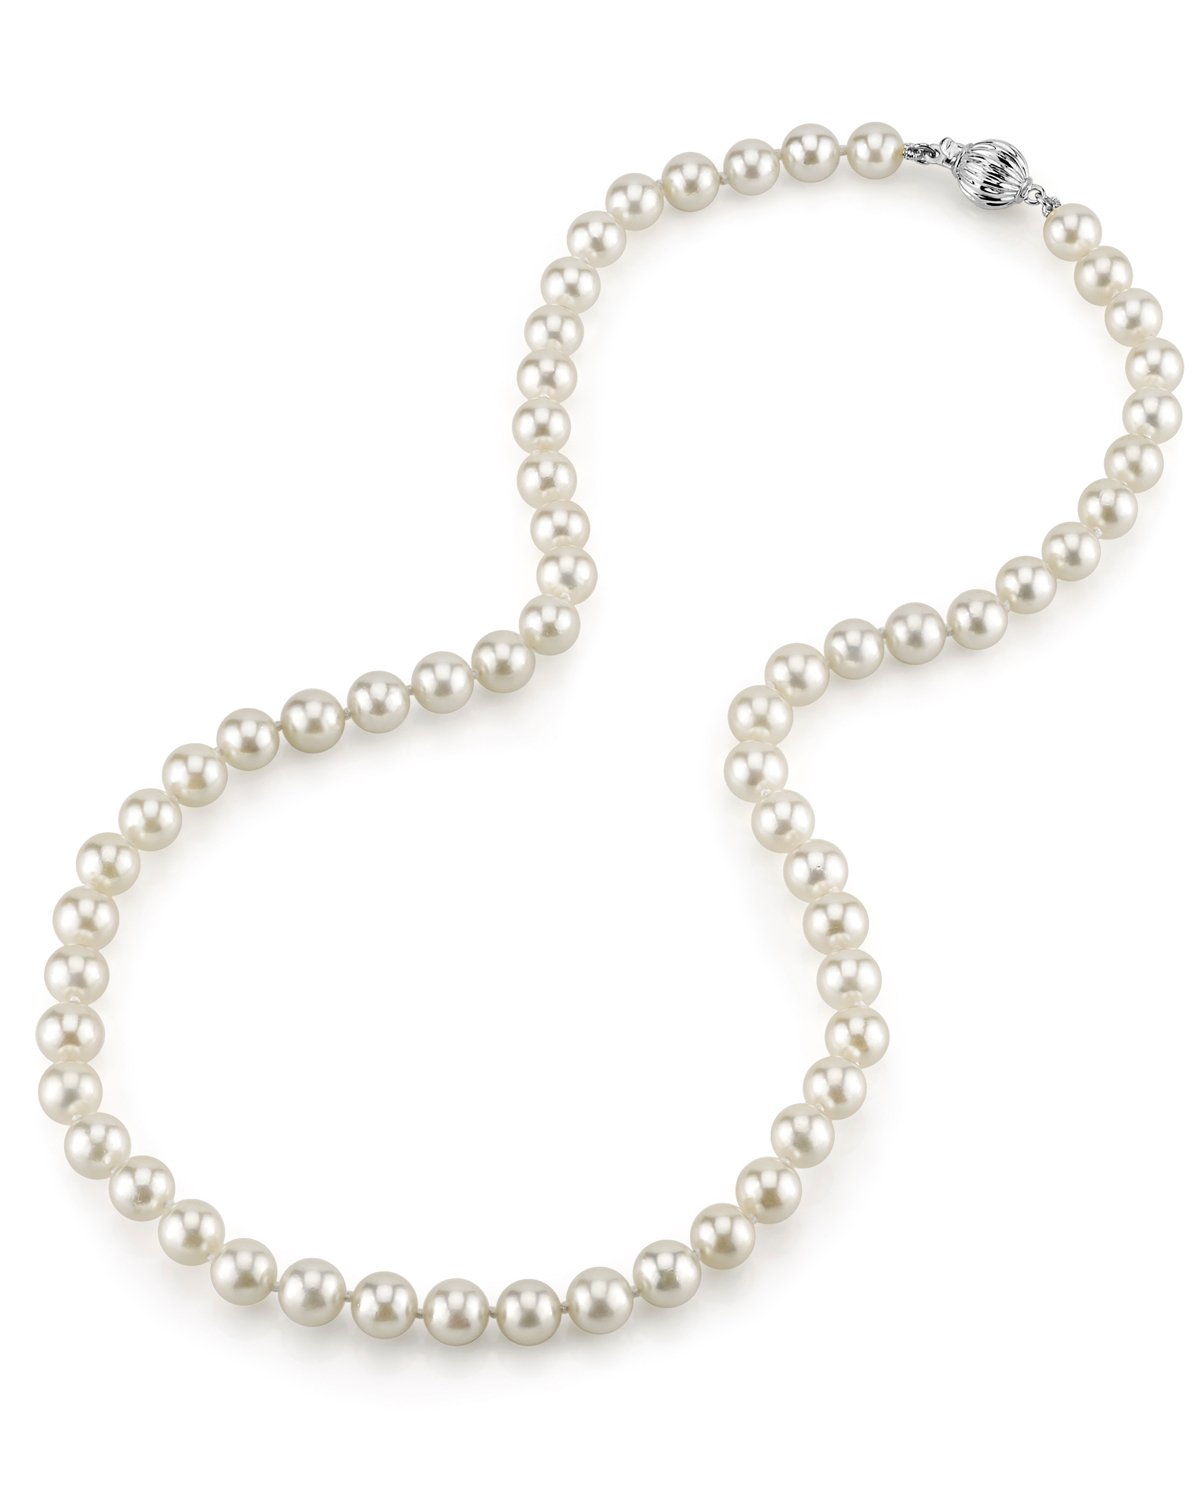 6.5-7.0mm Japanese Akoya White Pearl Necklace- AA+ Quality